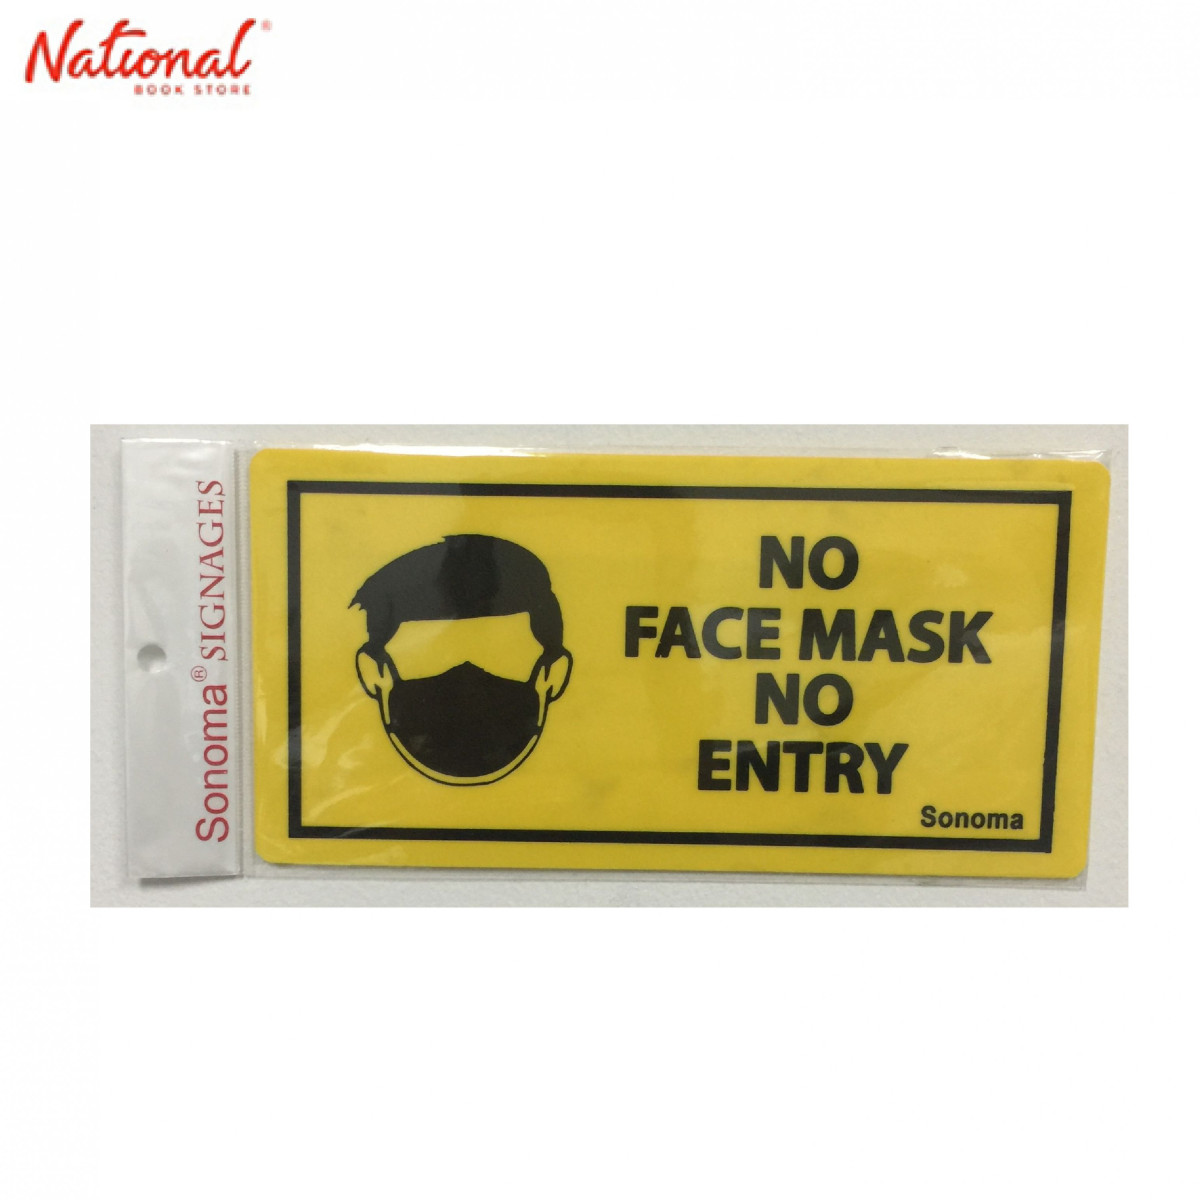 Sonoma Signage 4x8 inches Yellow No Face Mask, No Entry - Office - Business - Essentials